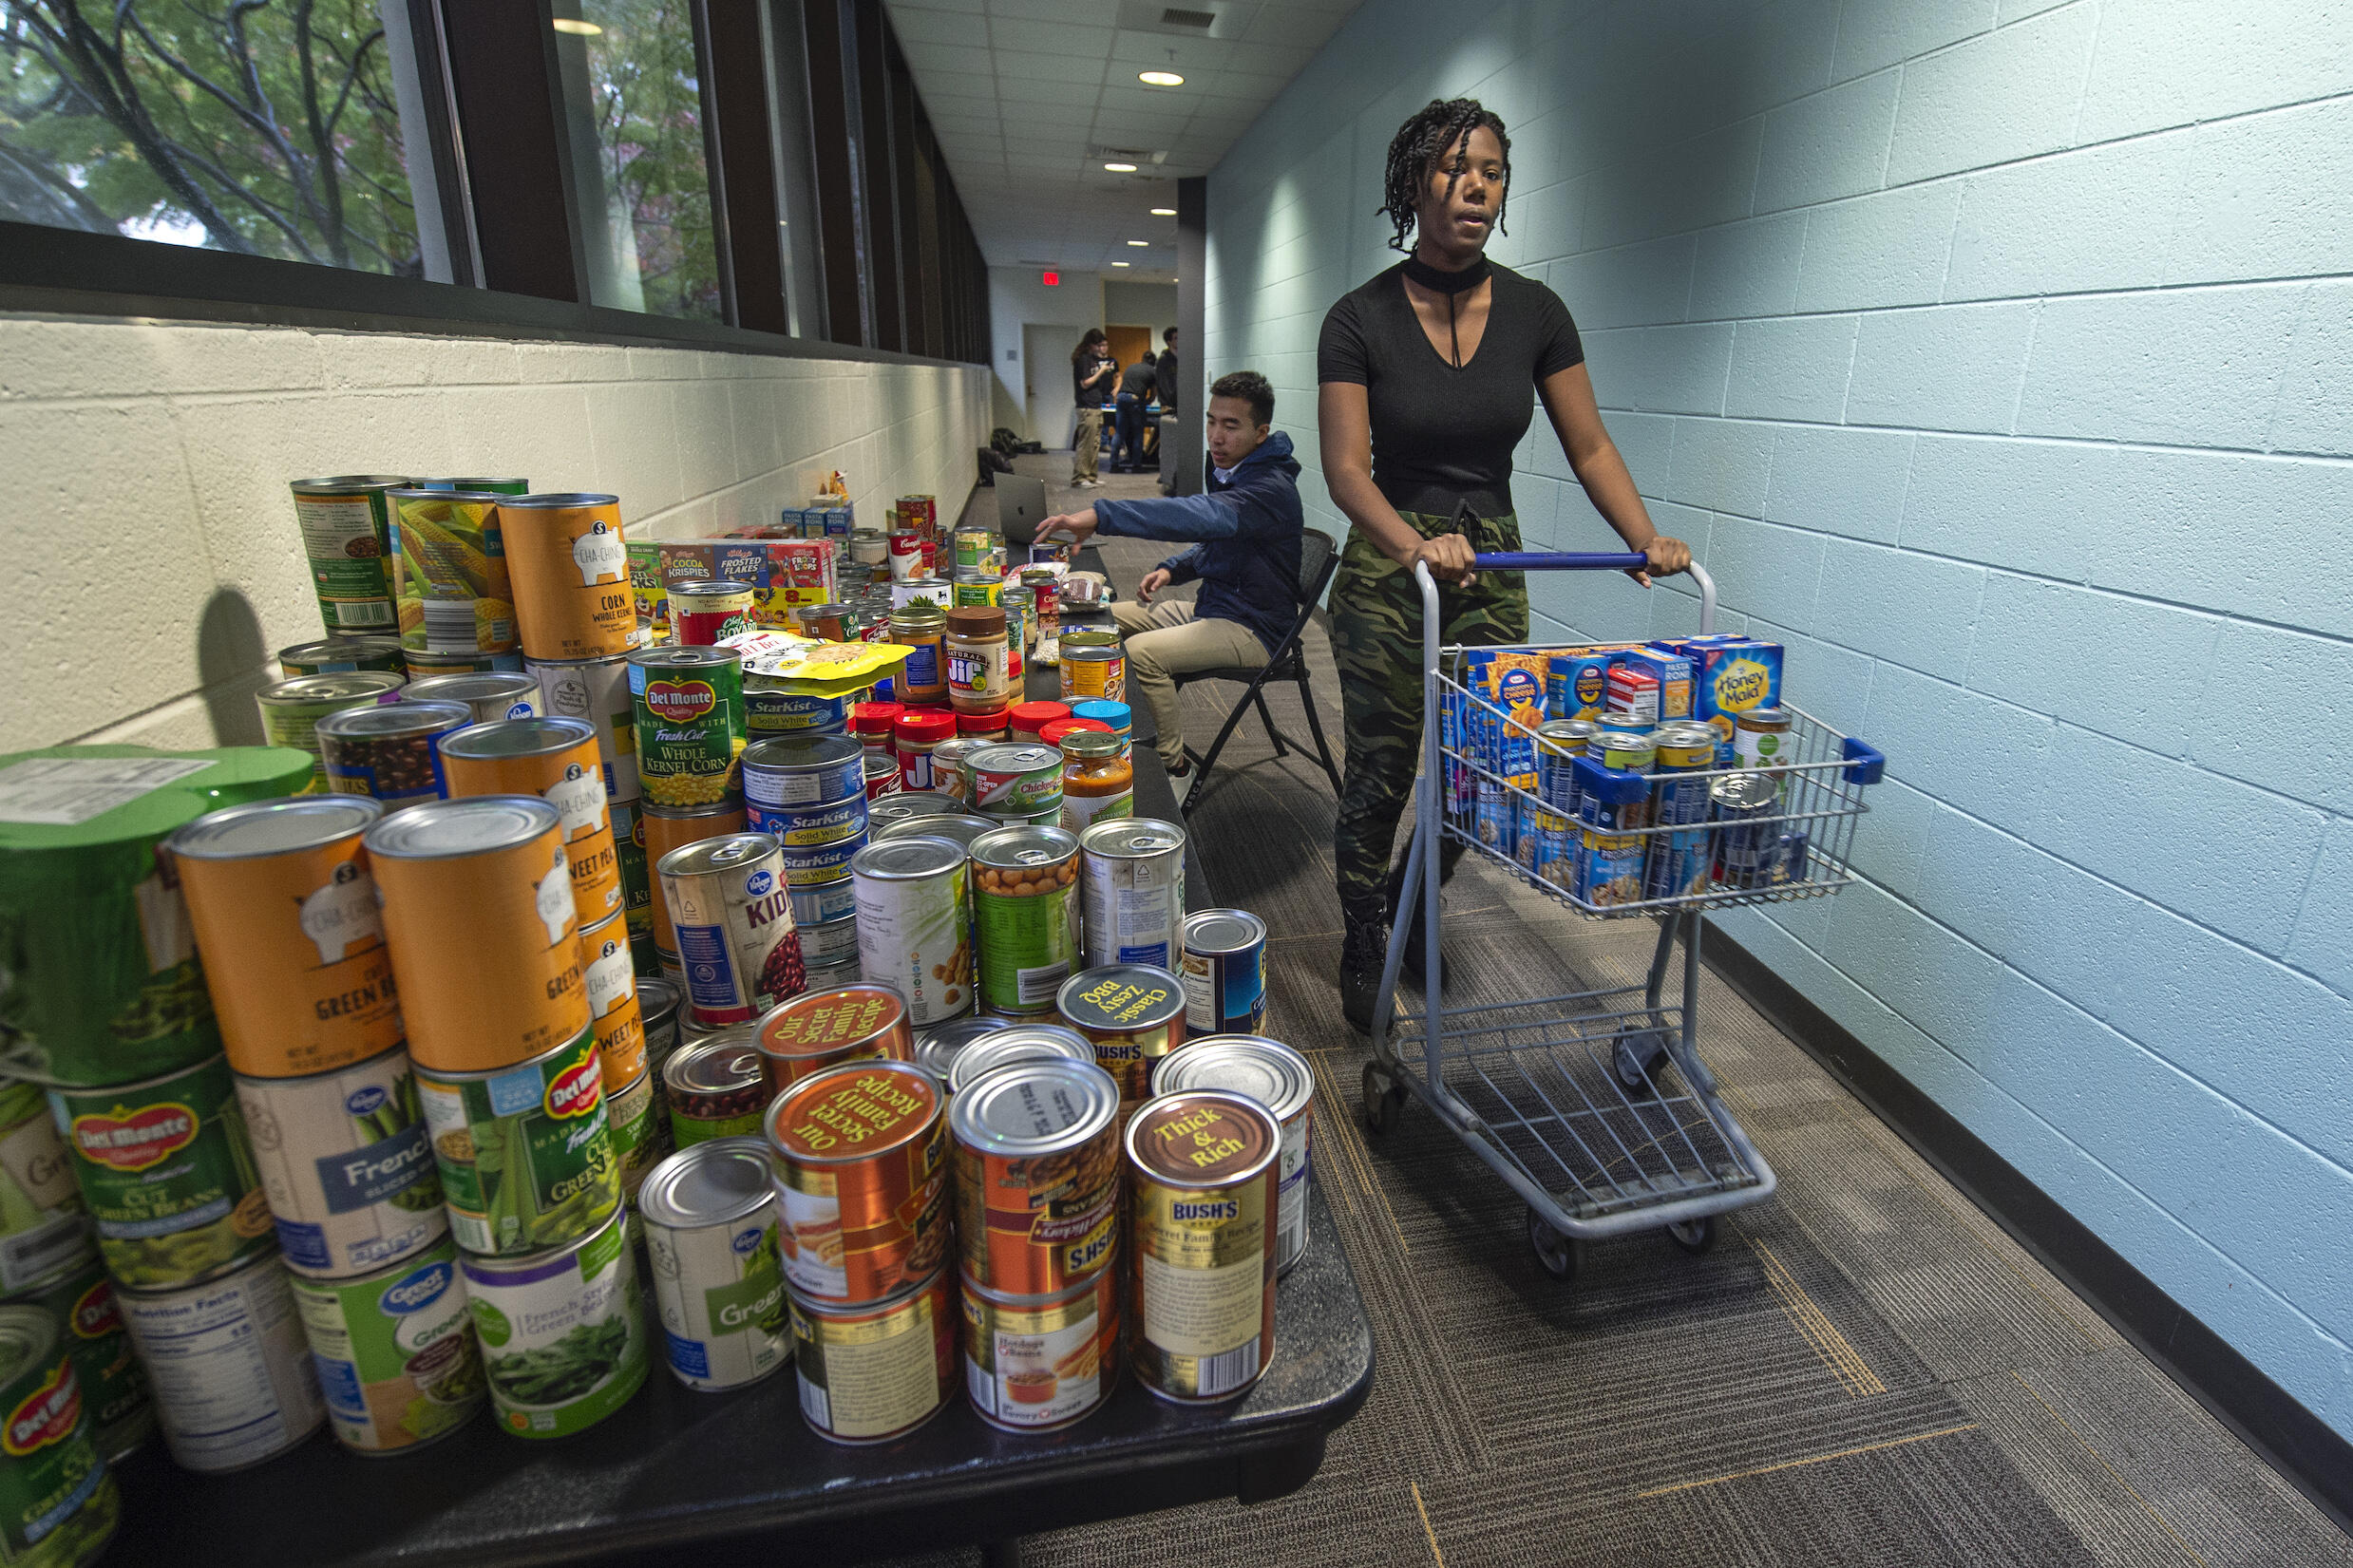 A person pushes a grocery cart full of donated items. Cans and other donated food are stacked on a table.